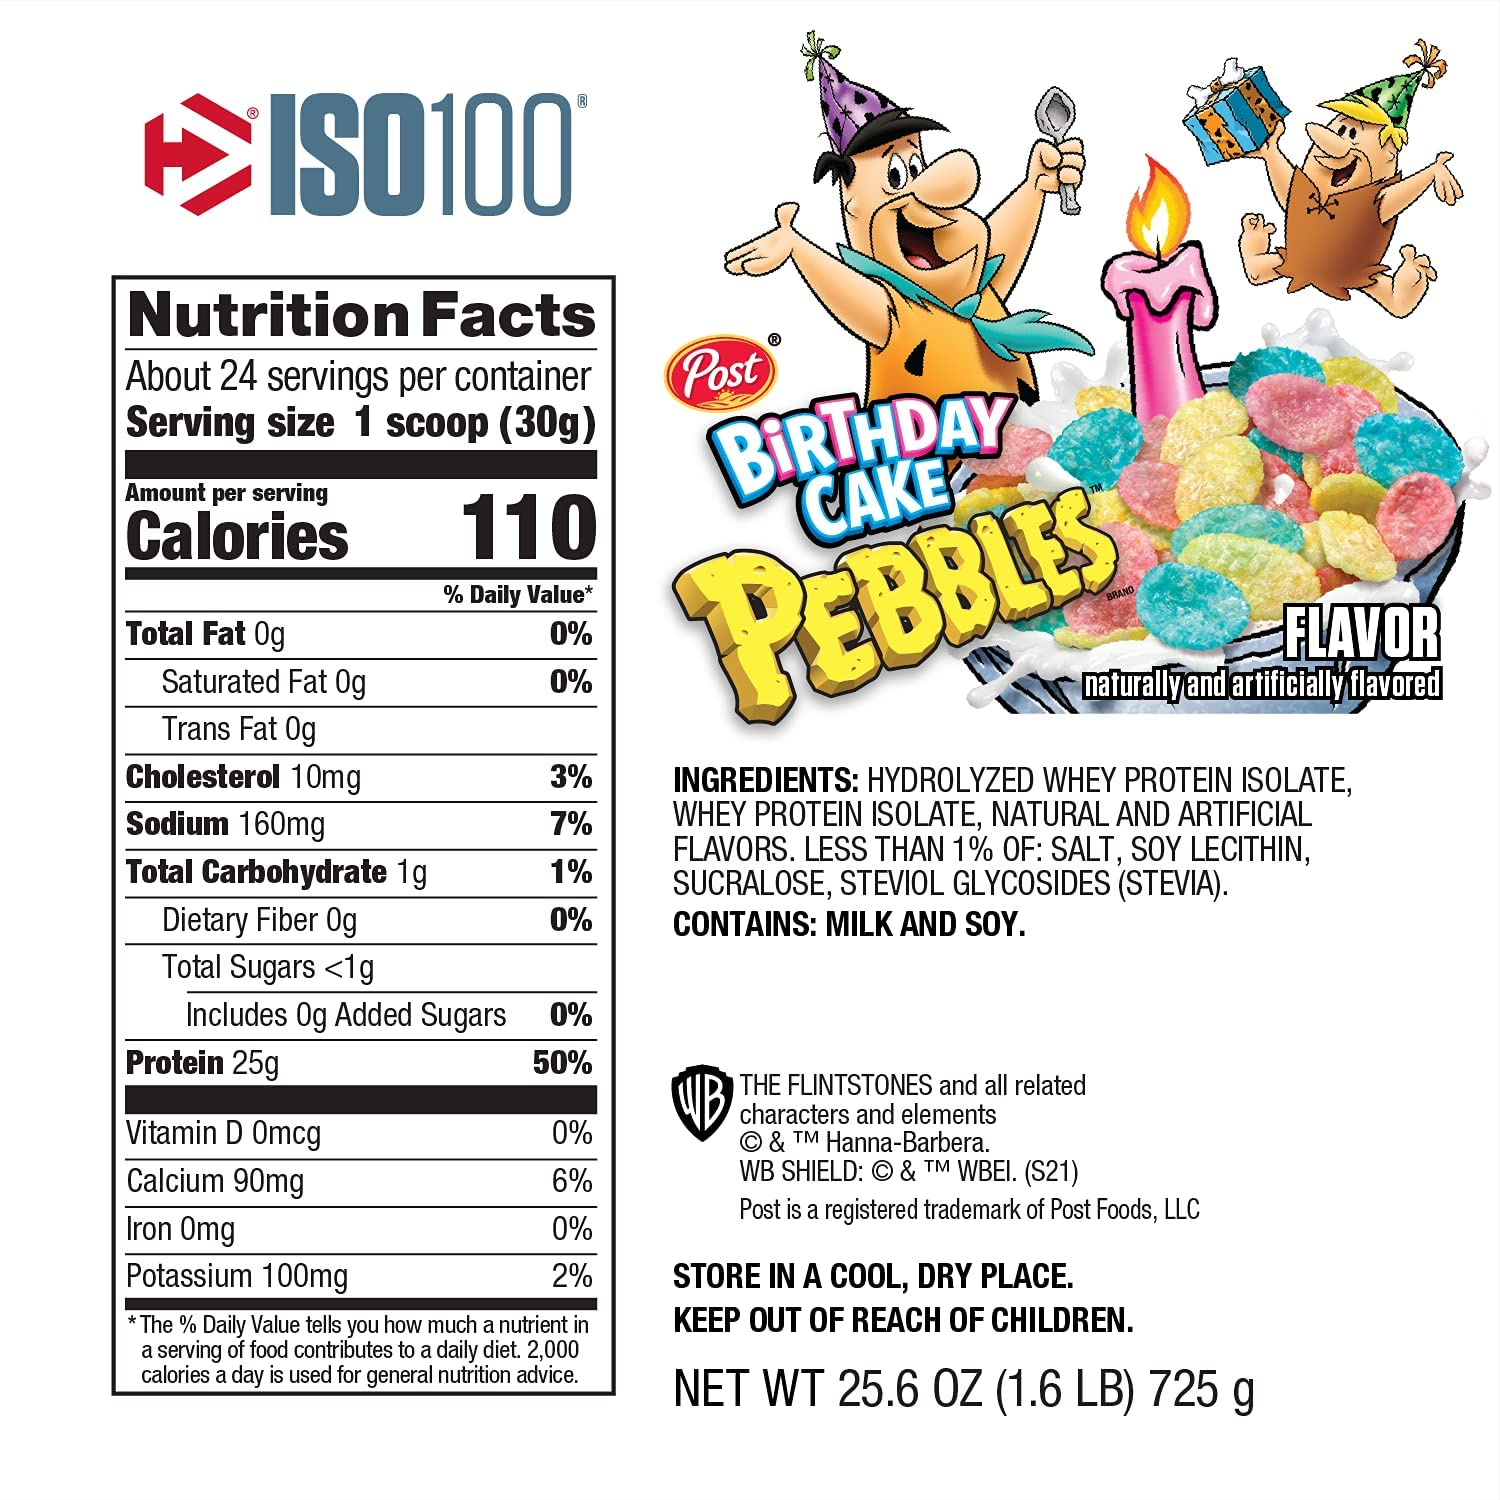 ISO100 Hydrolyzed Protein Powder, 100% Whey Isolate Protein, 25G of Protein, 5.5G Bcaas, Gluten Free, Fast Absorbing, Easy Digesting, Birthday Cake, 1.6 Pound (Packaging May Vary)